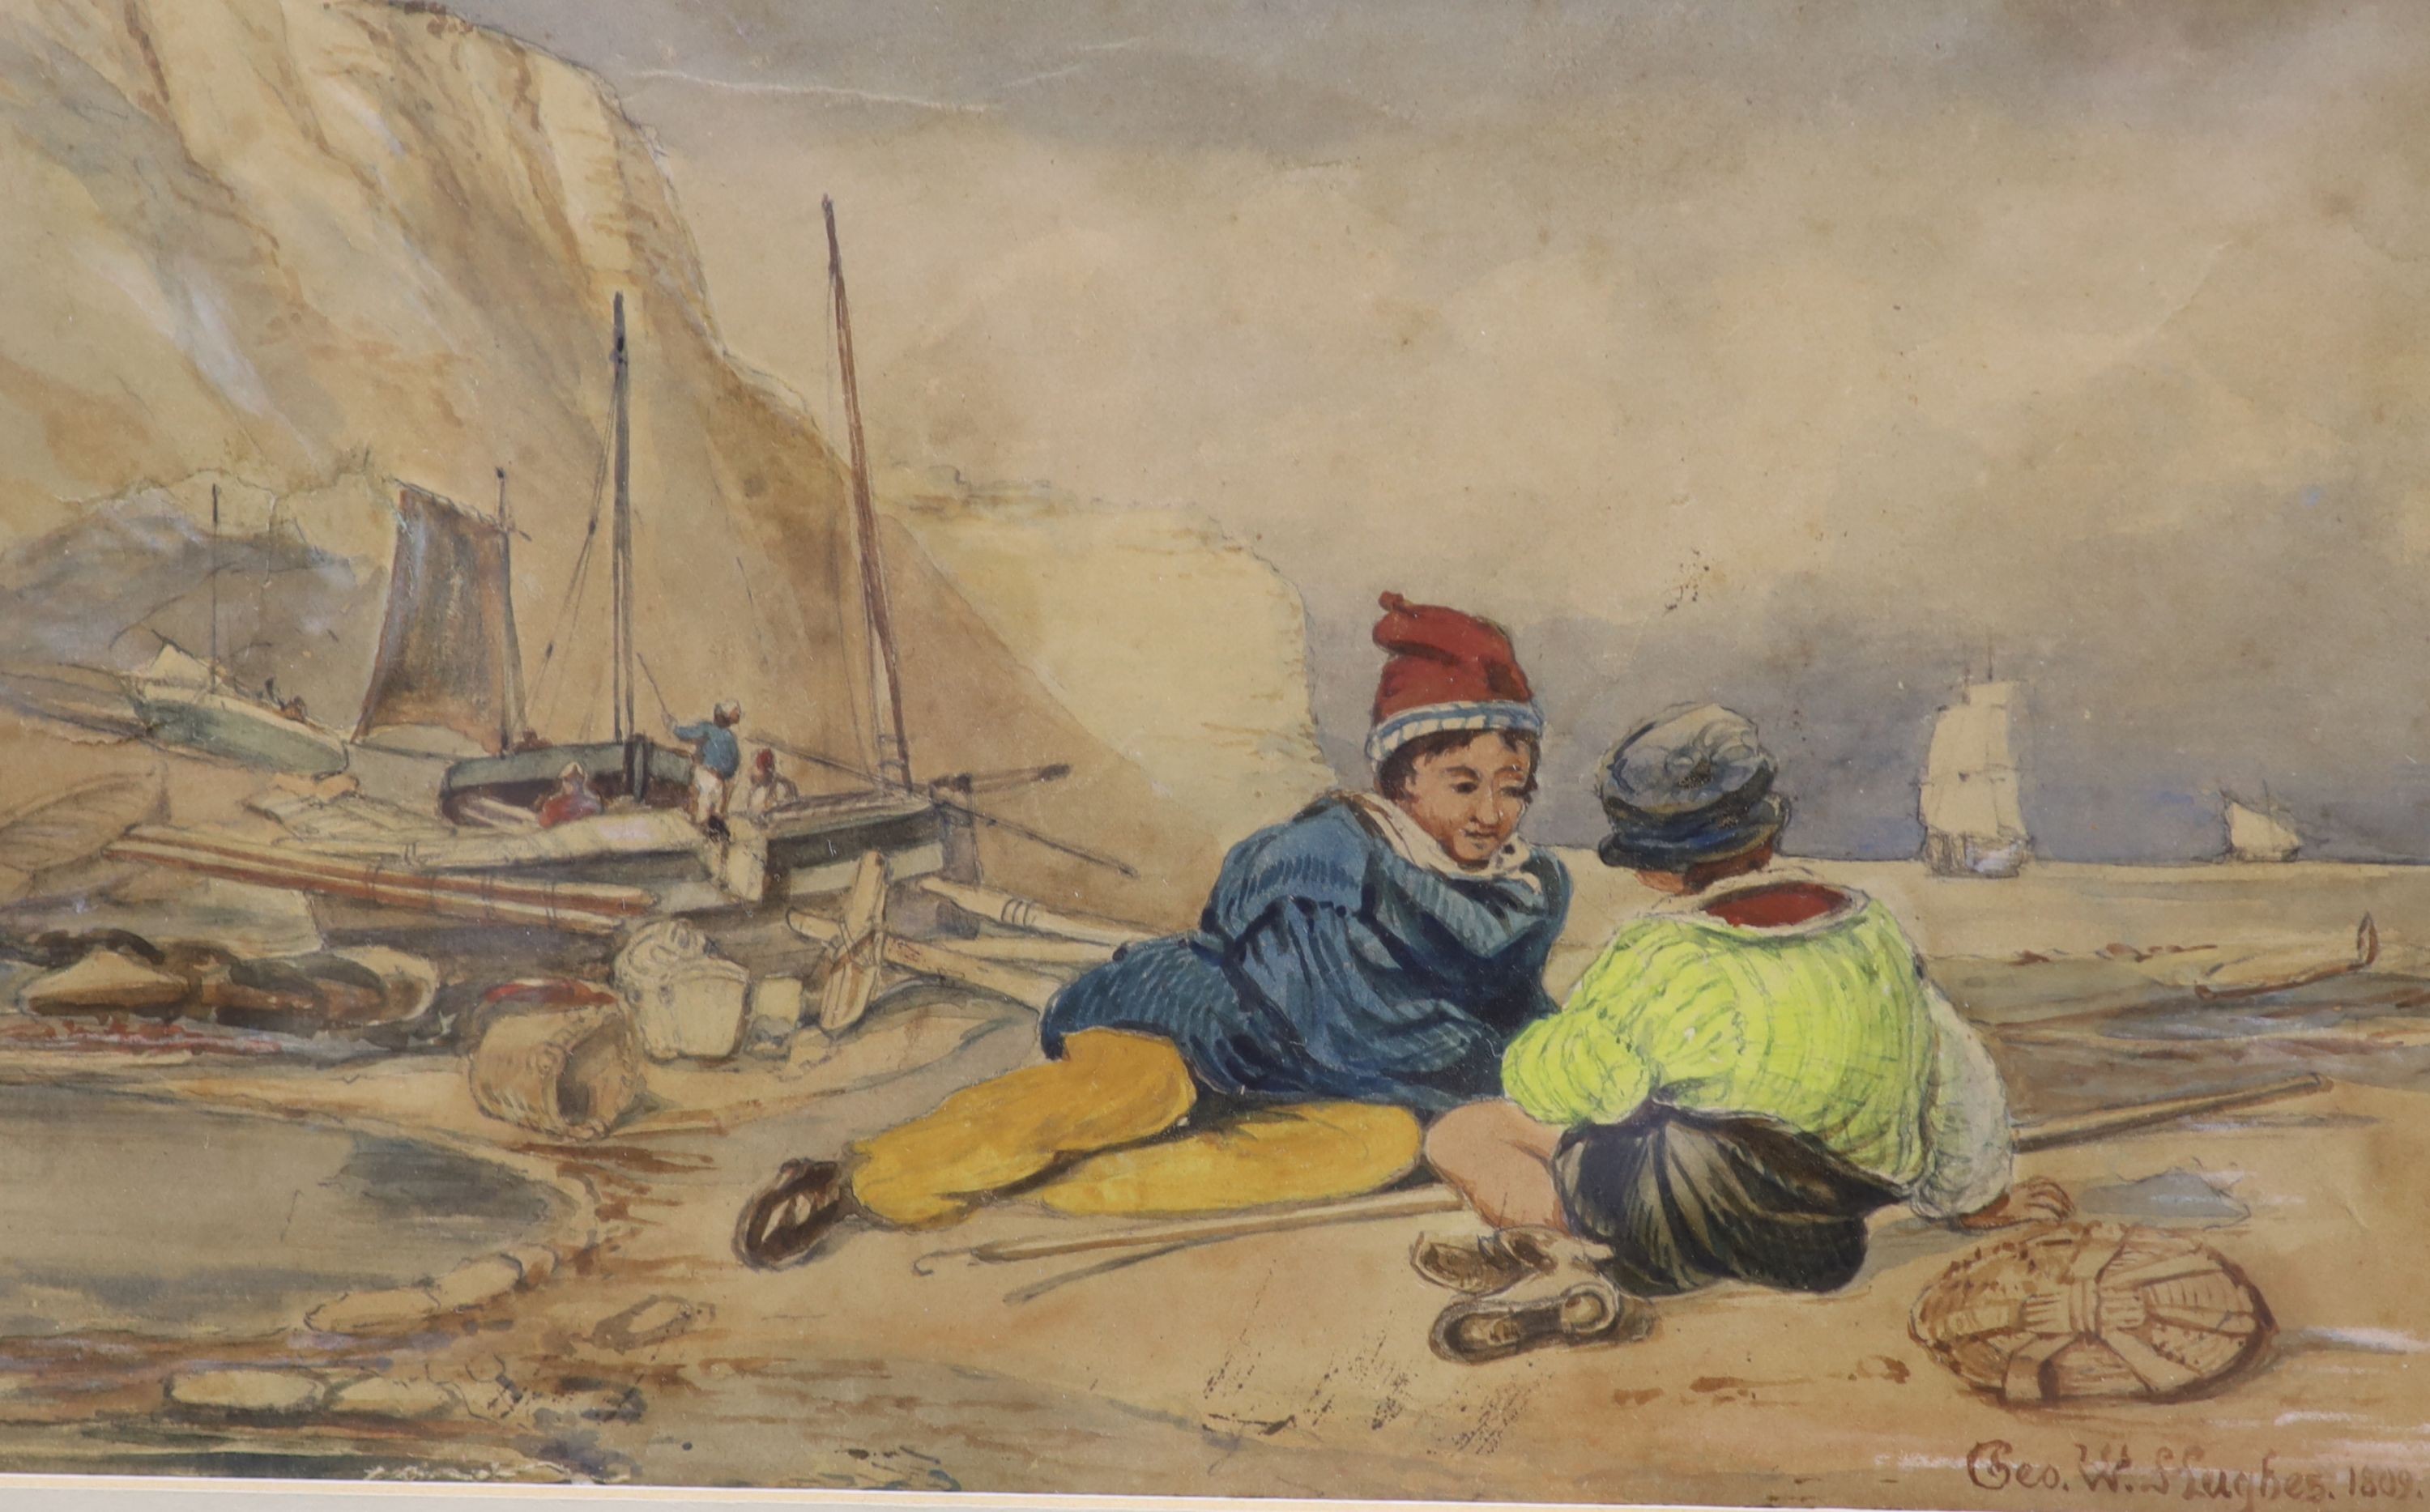 George W. Hughes (fl.1813-58), watercolour, Fisherboys on the shore, signed and dated 1809, 15 x